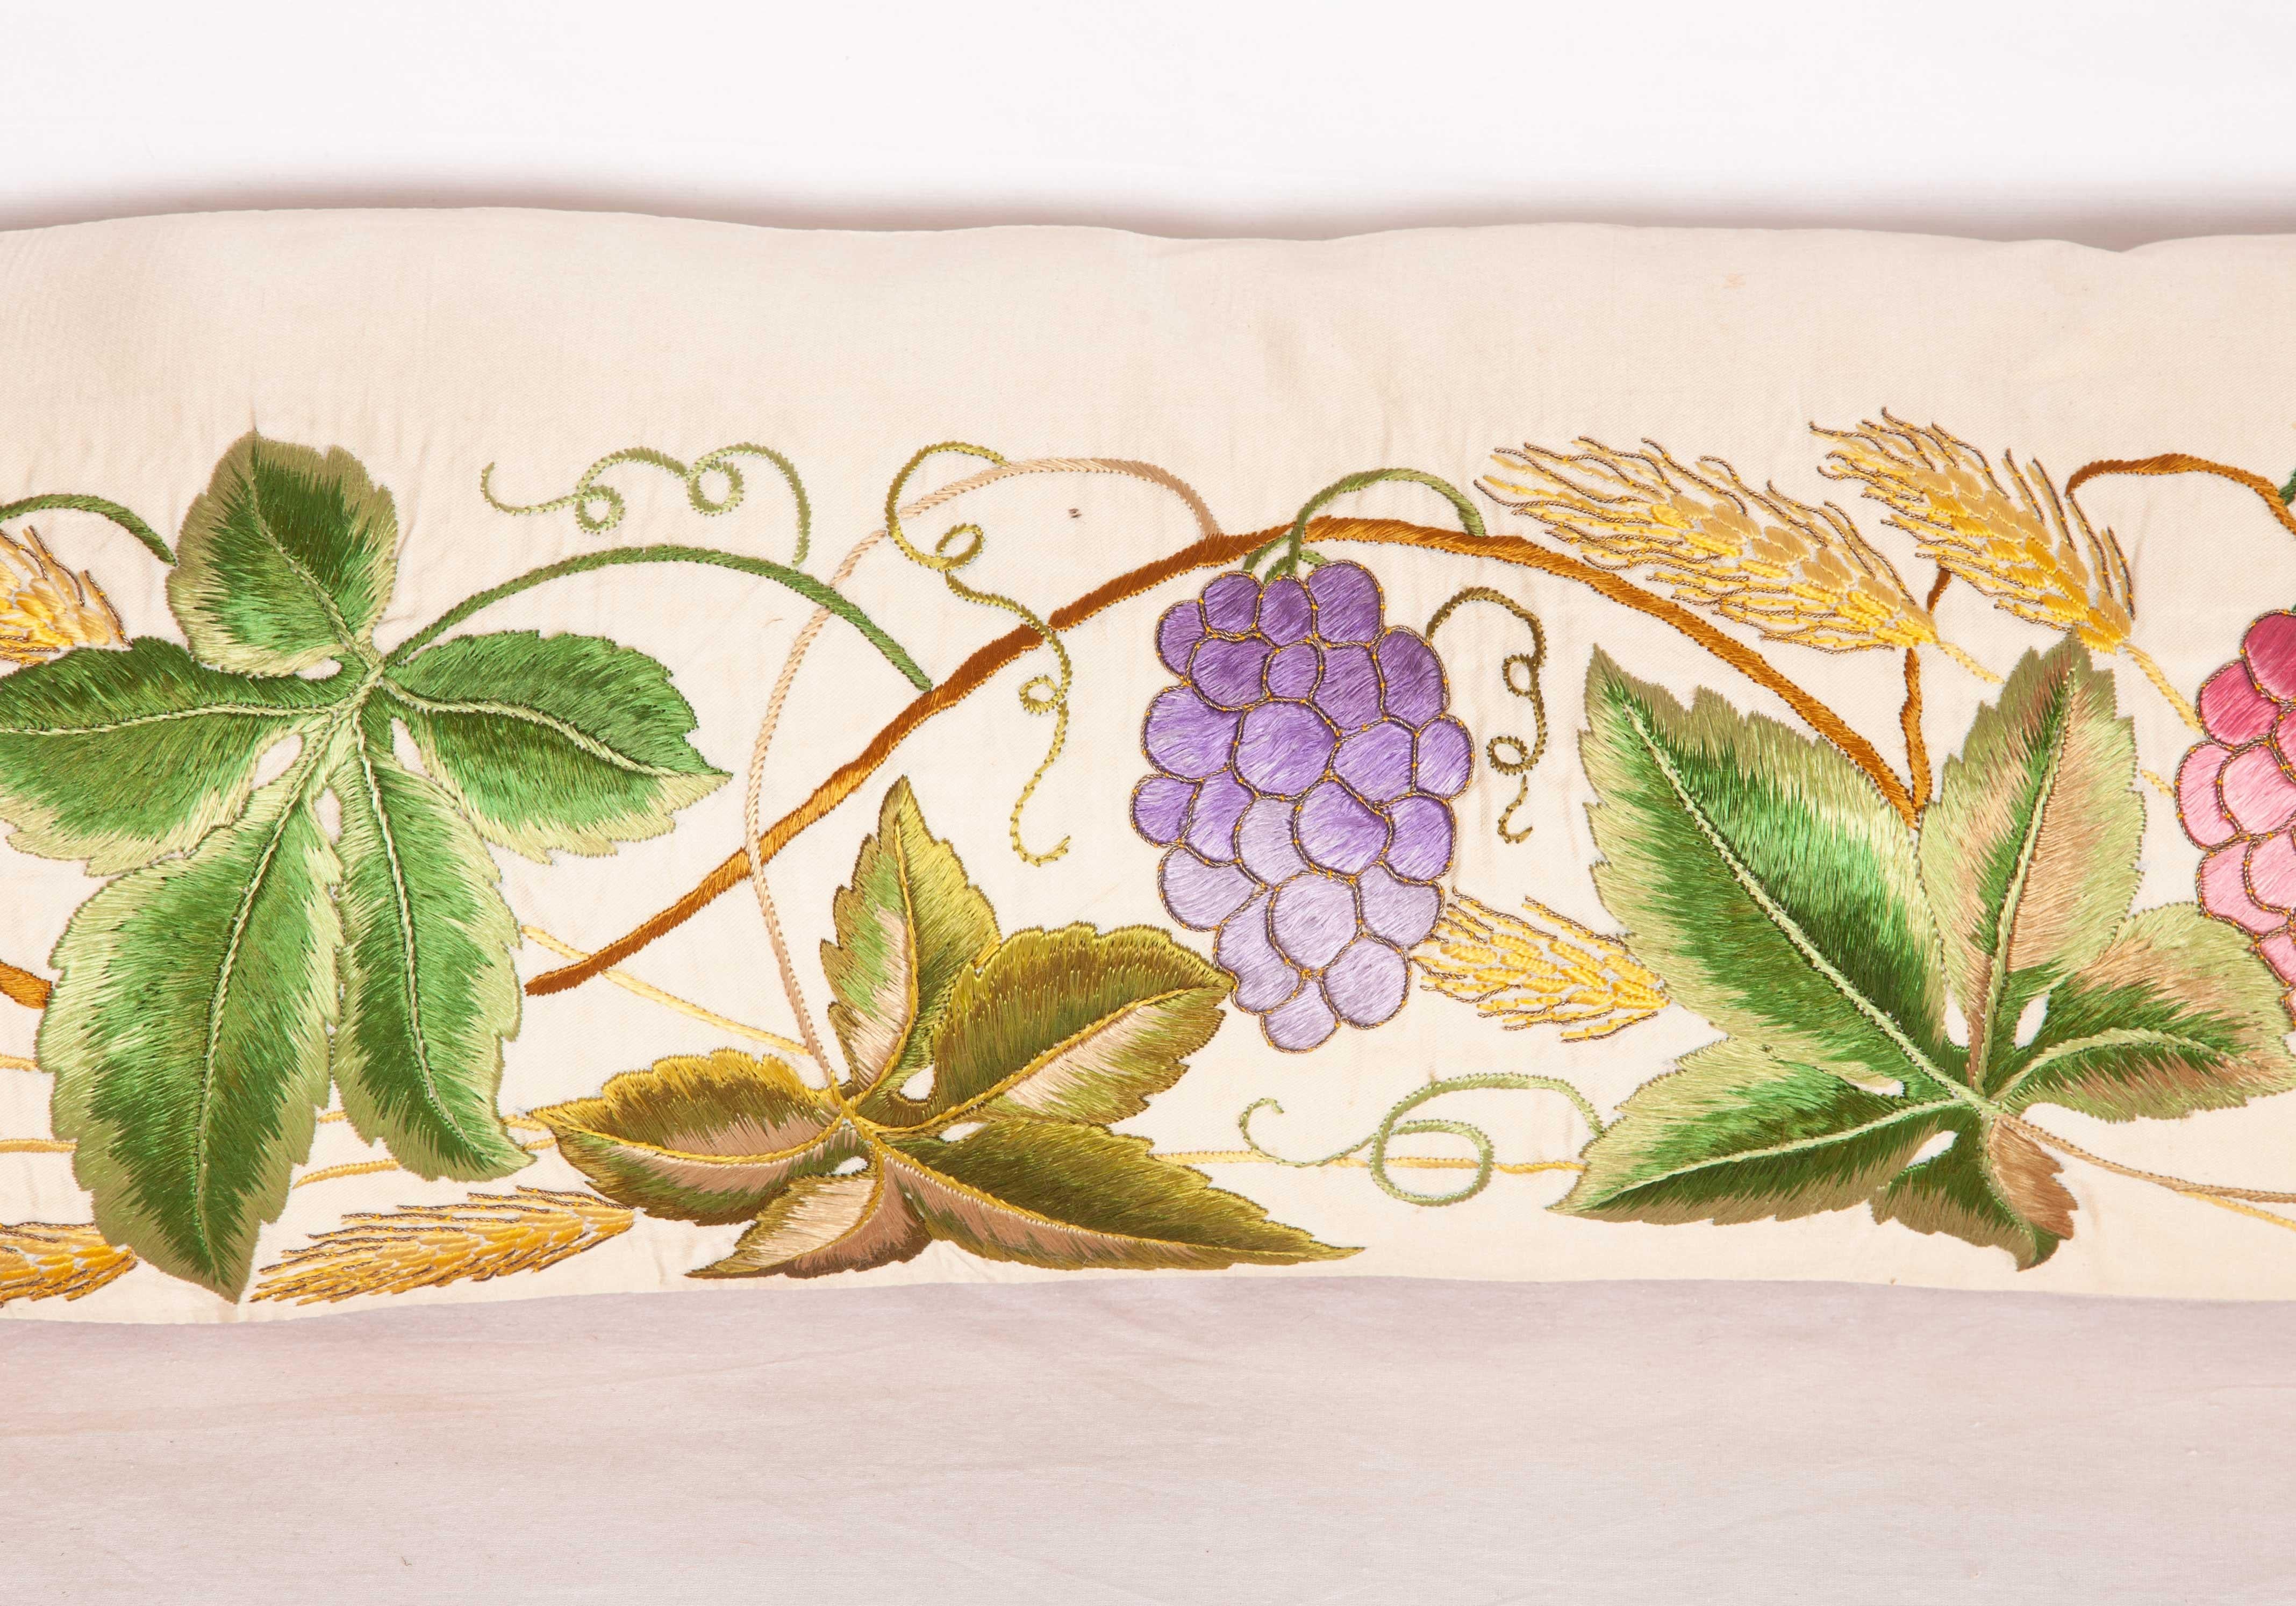 Suzani Antique Lumbar Pillow Case Made from an 18th-19th Century European Embroidery For Sale